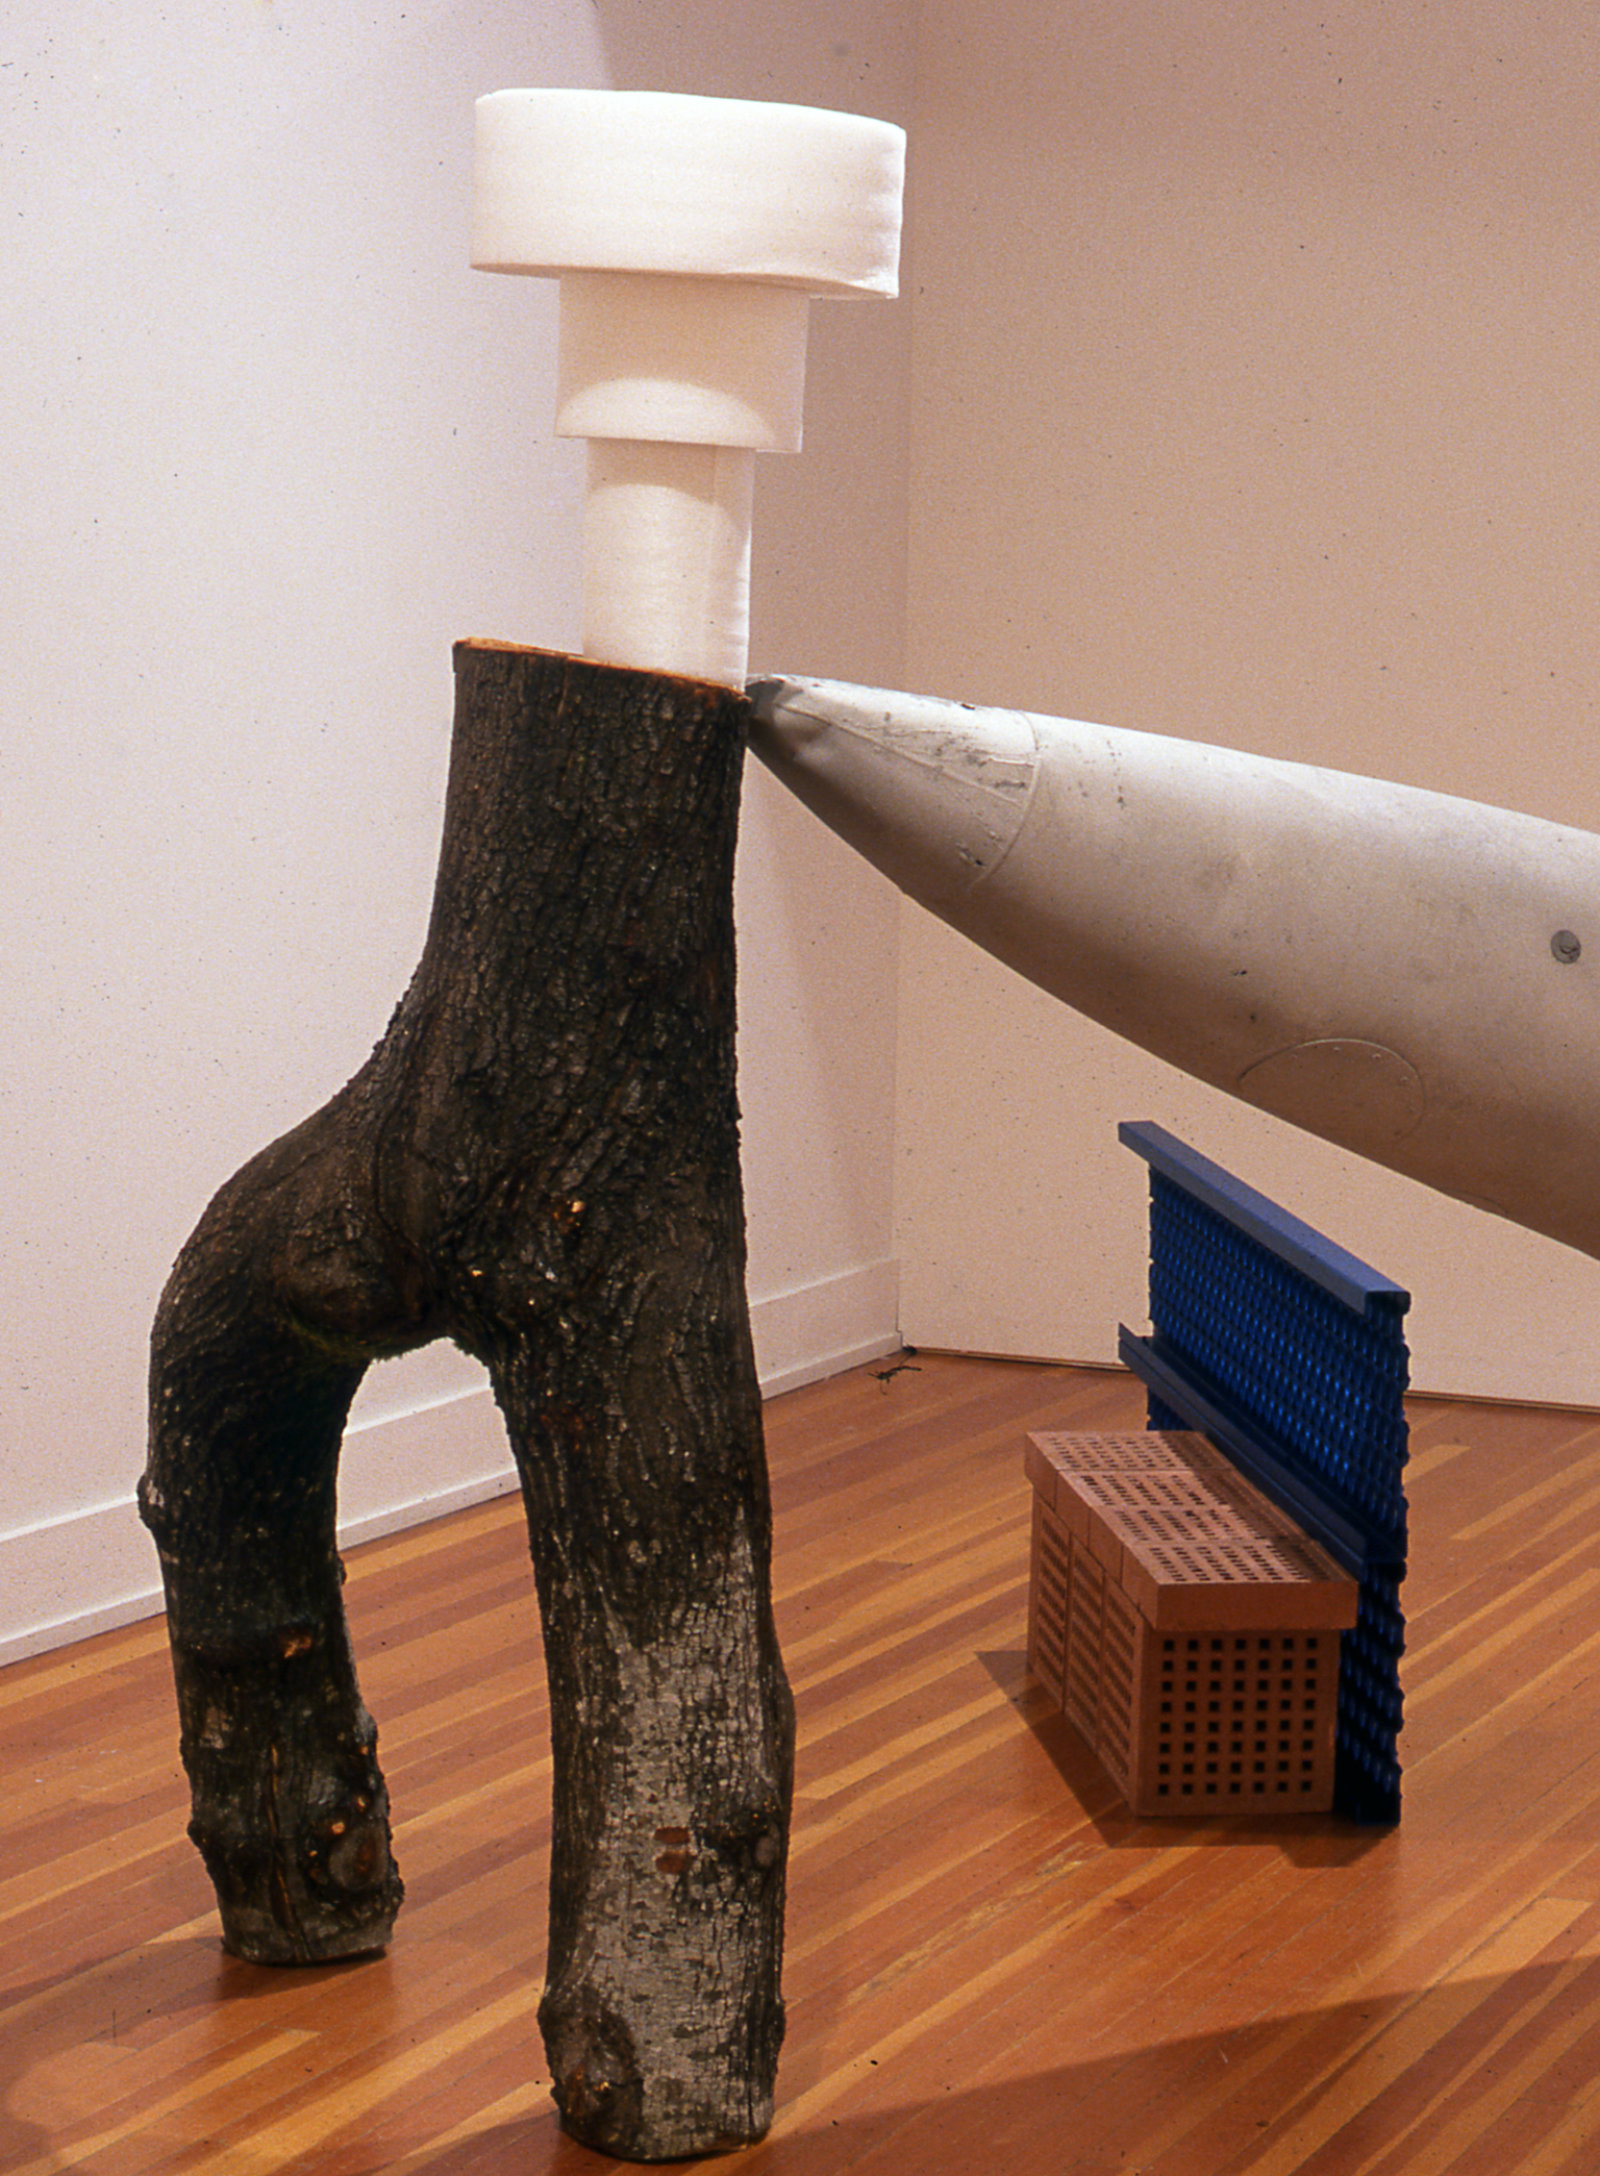 Jerry Pethick, Trough (detail), 2001, wood, plastic, clay, anodized aluminum, sandblasted aluminum, 70 x 234 x 120 in. (178 x 340 x 305 cm)